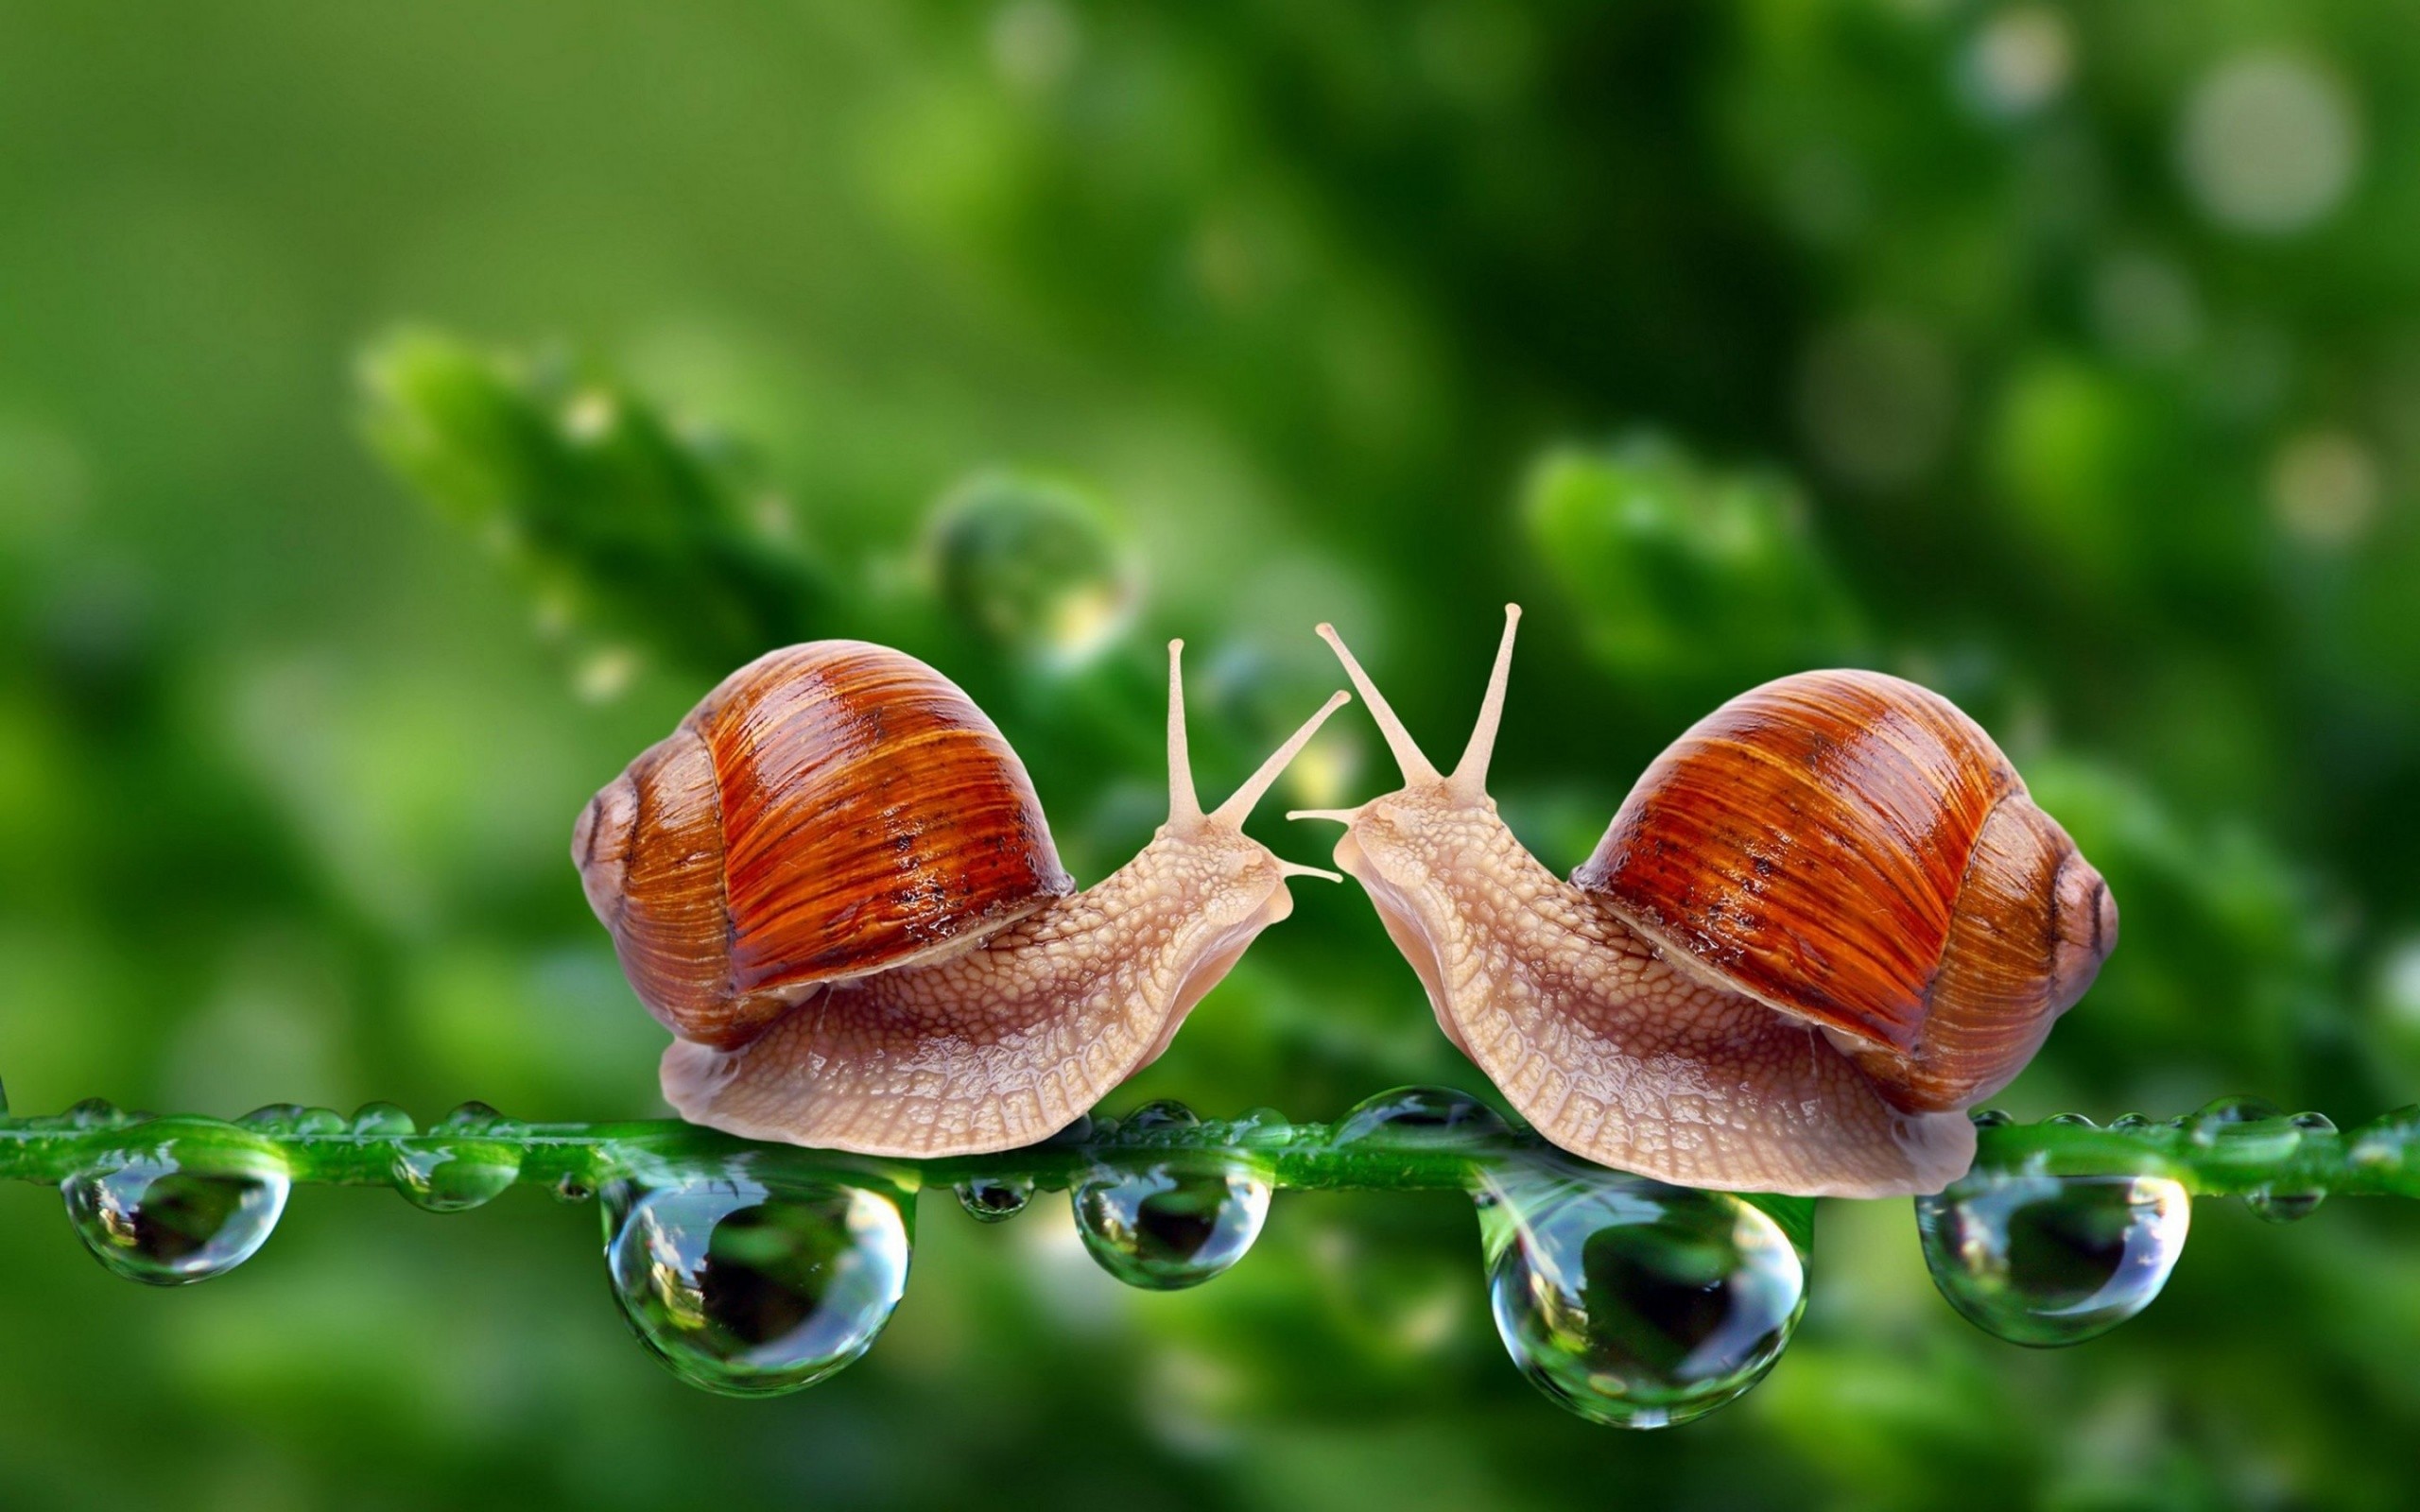 General 2560x1600 snail animals water drops wildlife green background nature closeup